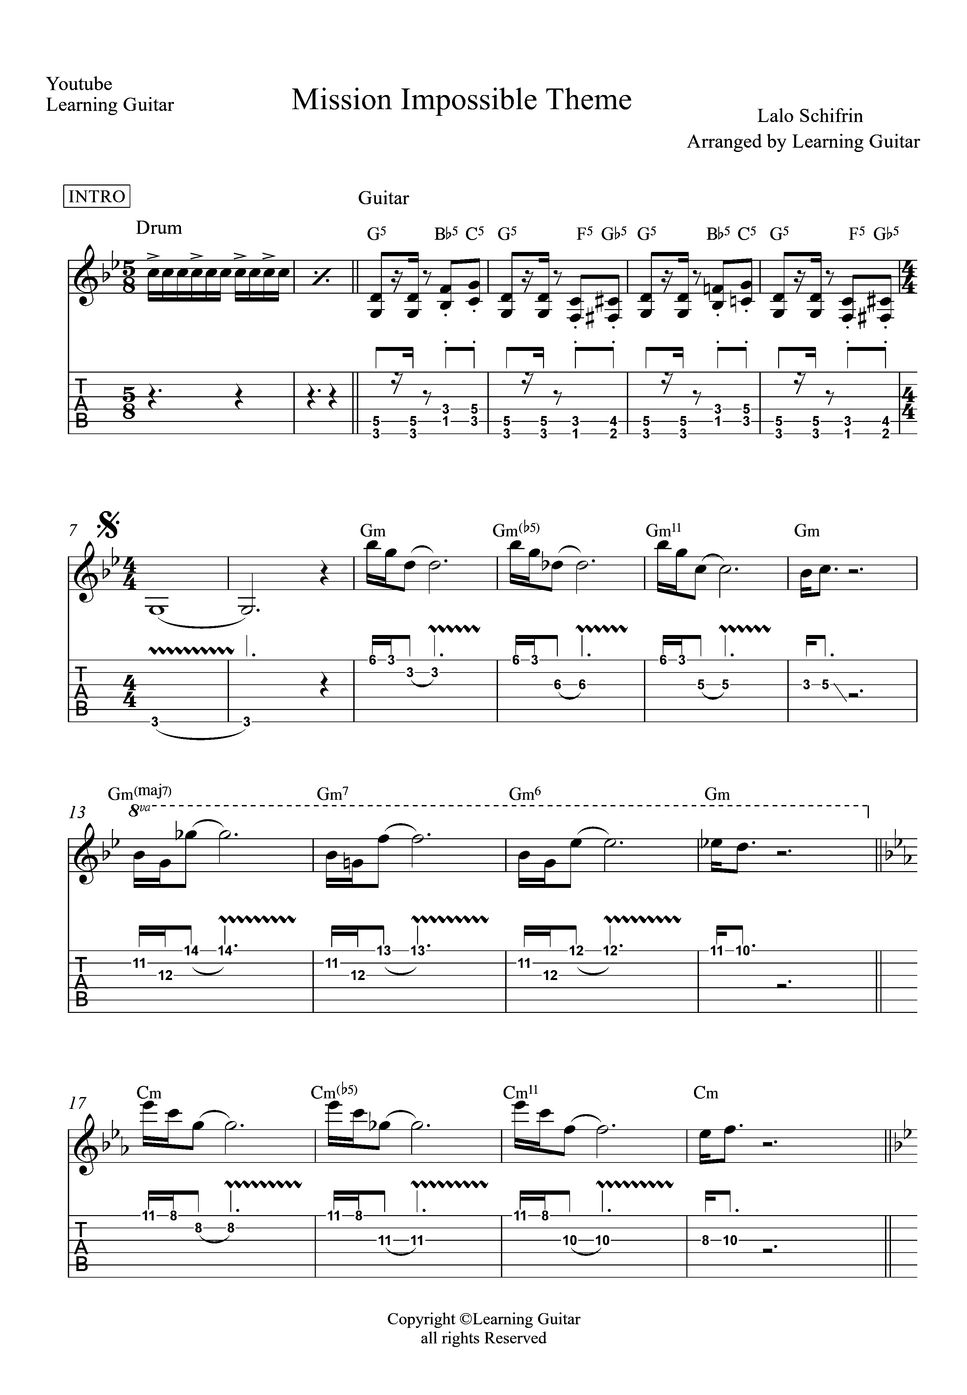 Lalo schifrin - Mission Impossible Theme (Guitar  Note &TAB) by Learning Guitar